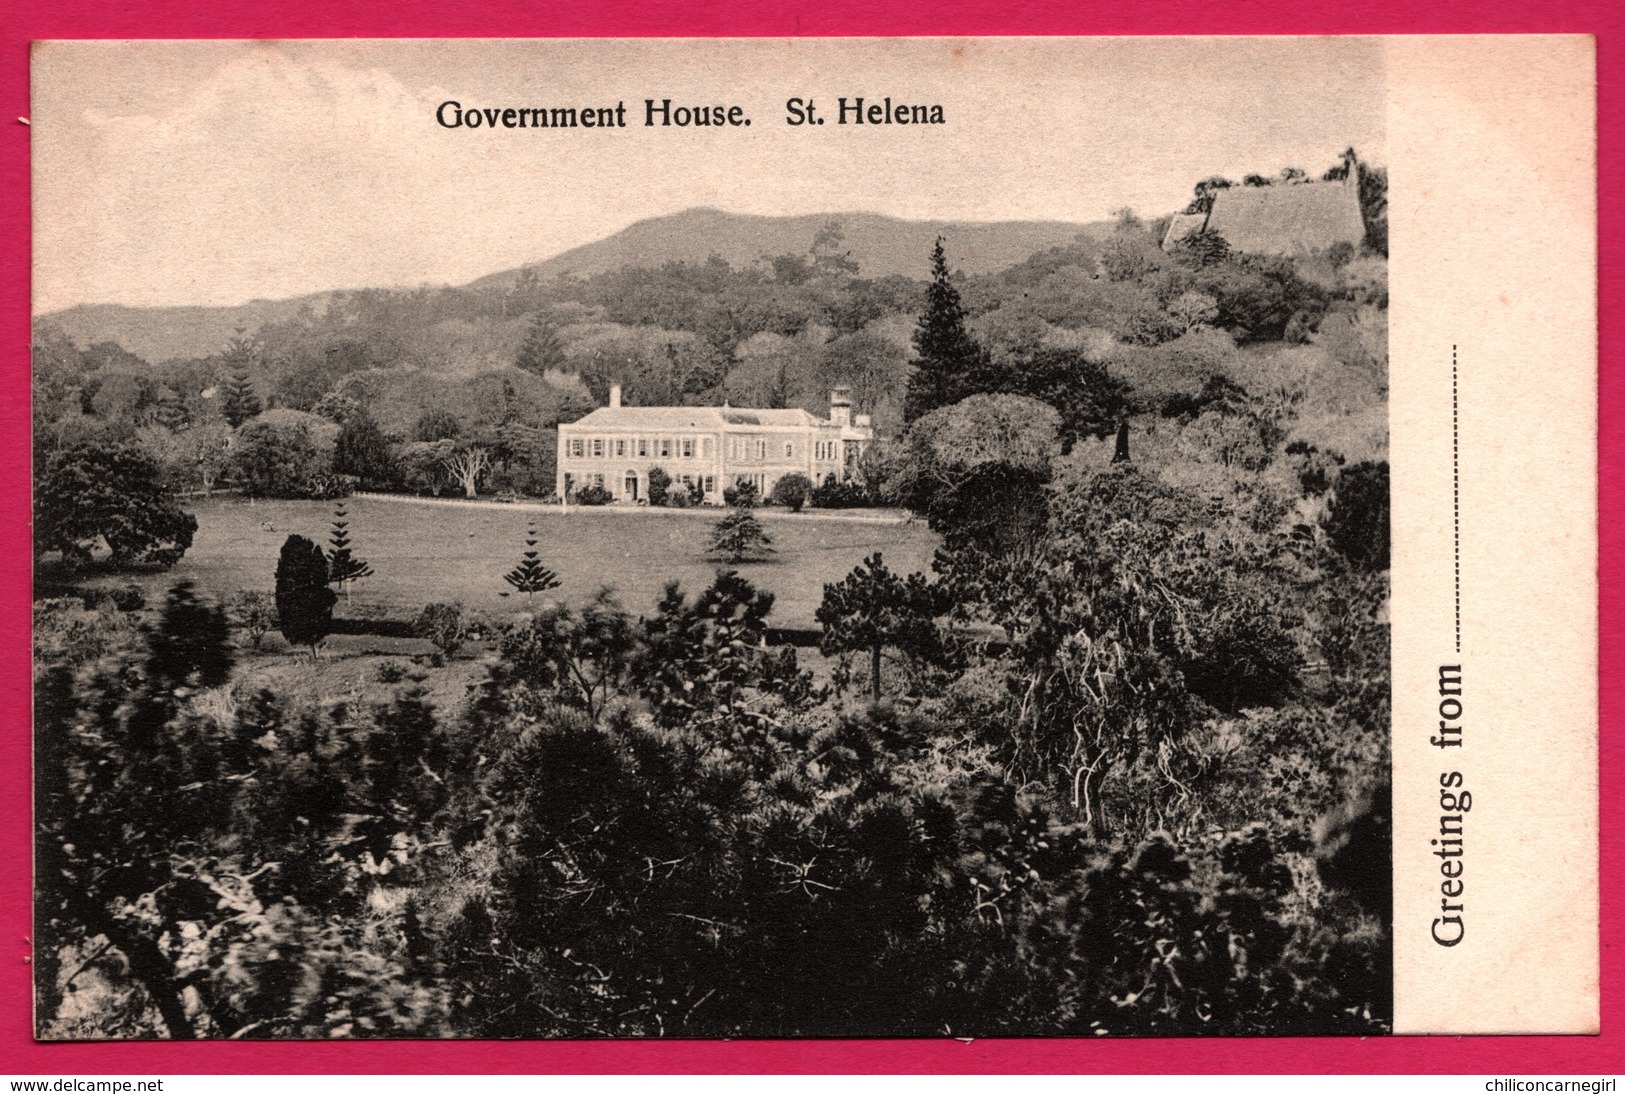 Greetings From St. Helena - Government House - T. JACKSON - St. Helena